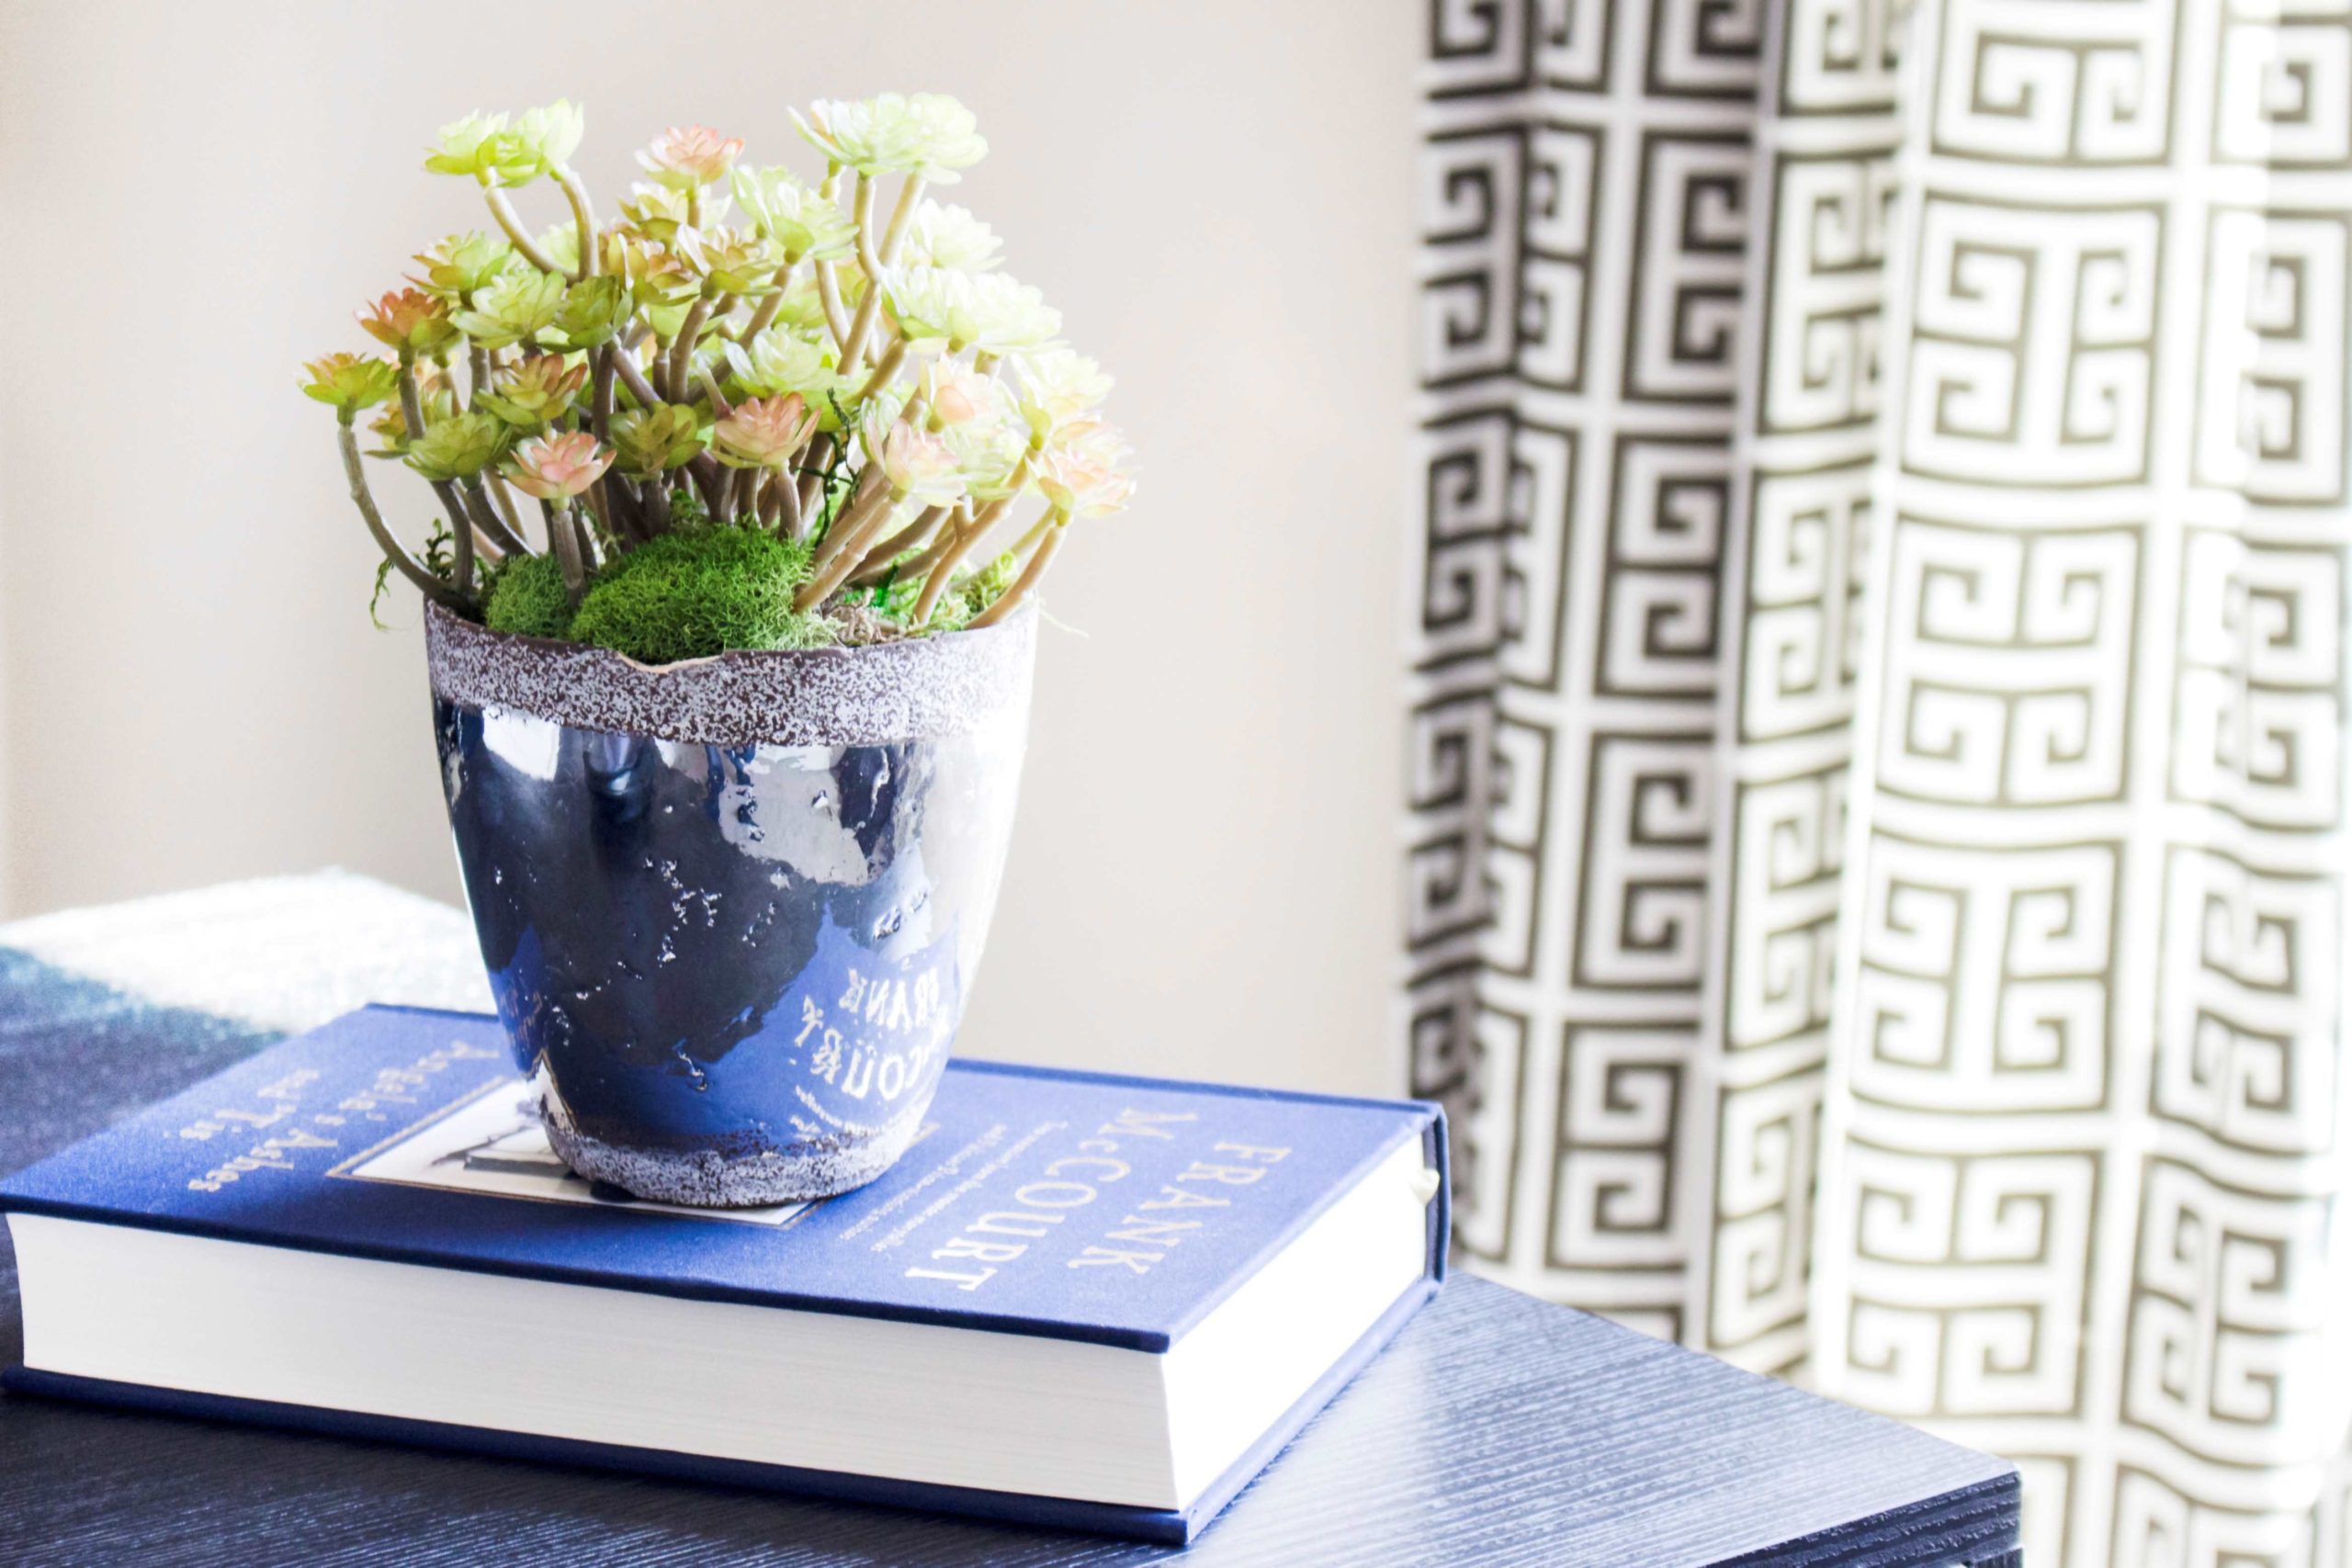 green and white flowers in a blue glass vase on a blue book on a blue desk